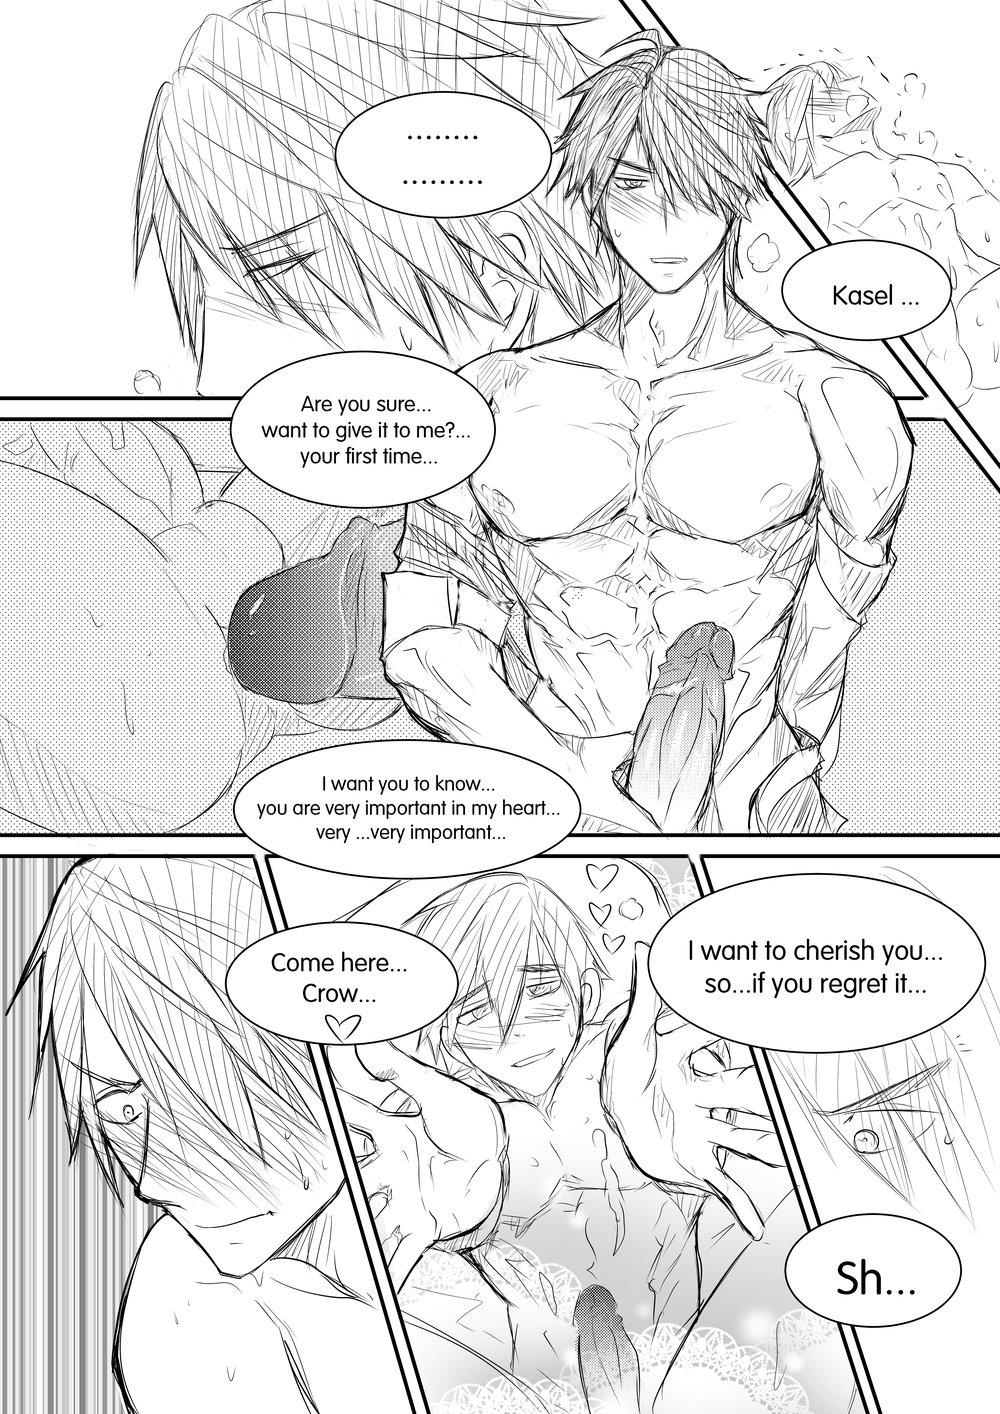 Kasel - The Knights Road 30